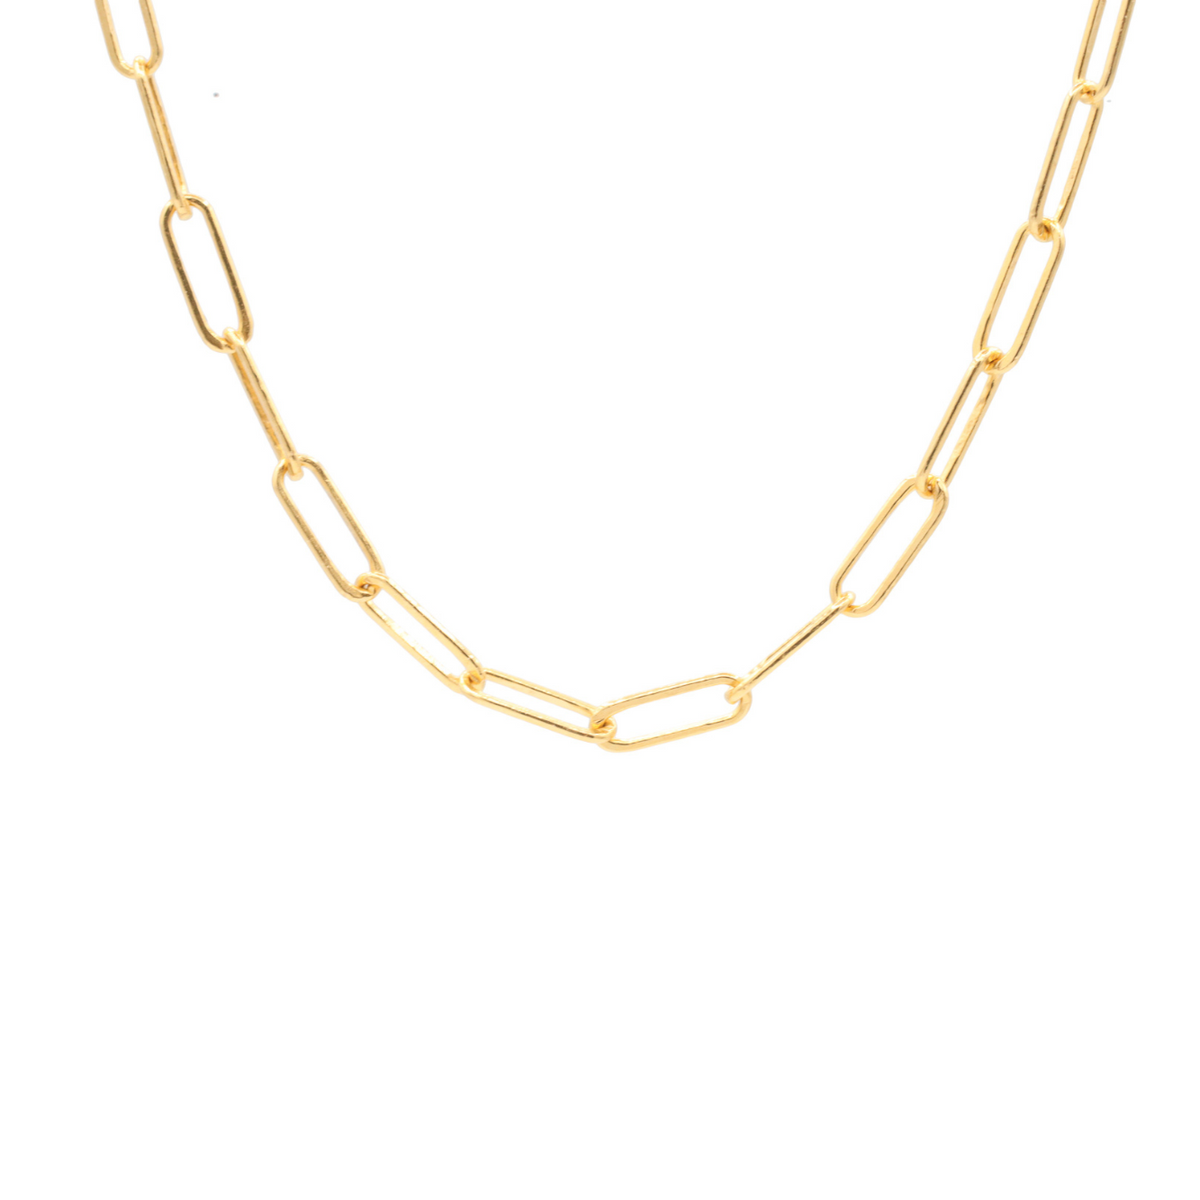 Paperclip necklace - 14K gold filled